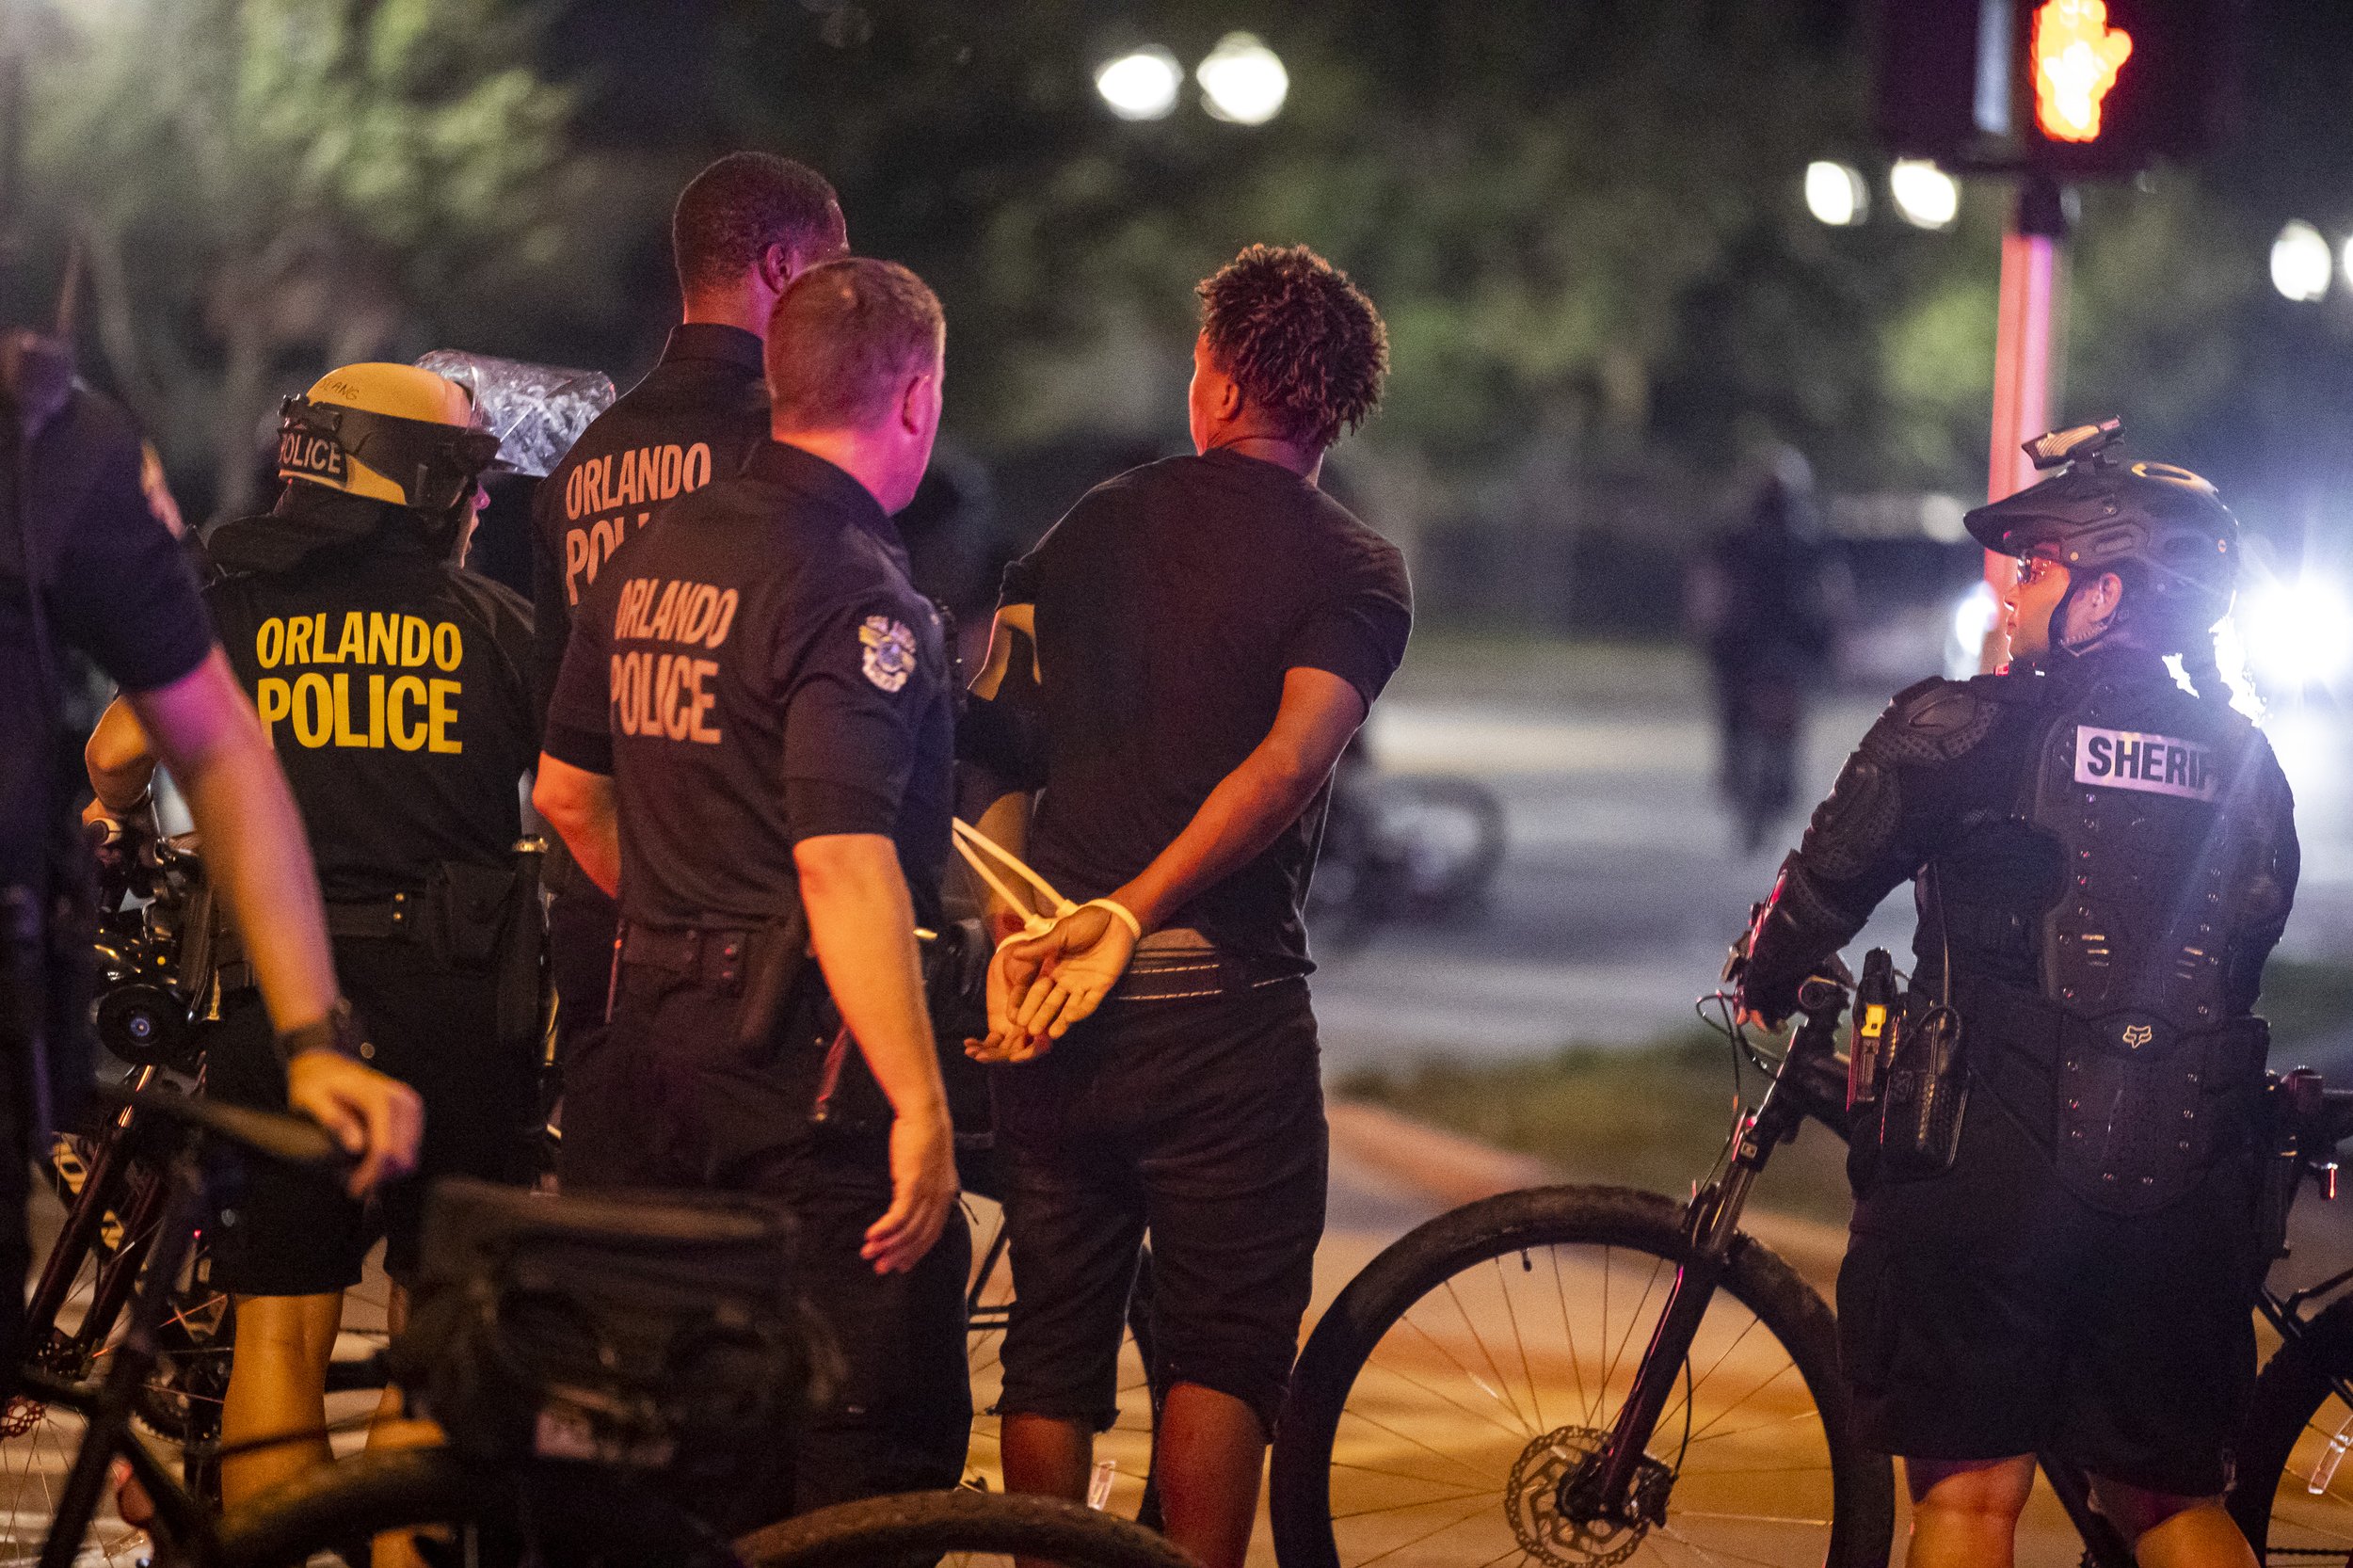  A protester is arrested after a 10 p.m. curfew following a demonstration demanding justice for George Floyd in Orlando on Sunday, May 31, 2020. 